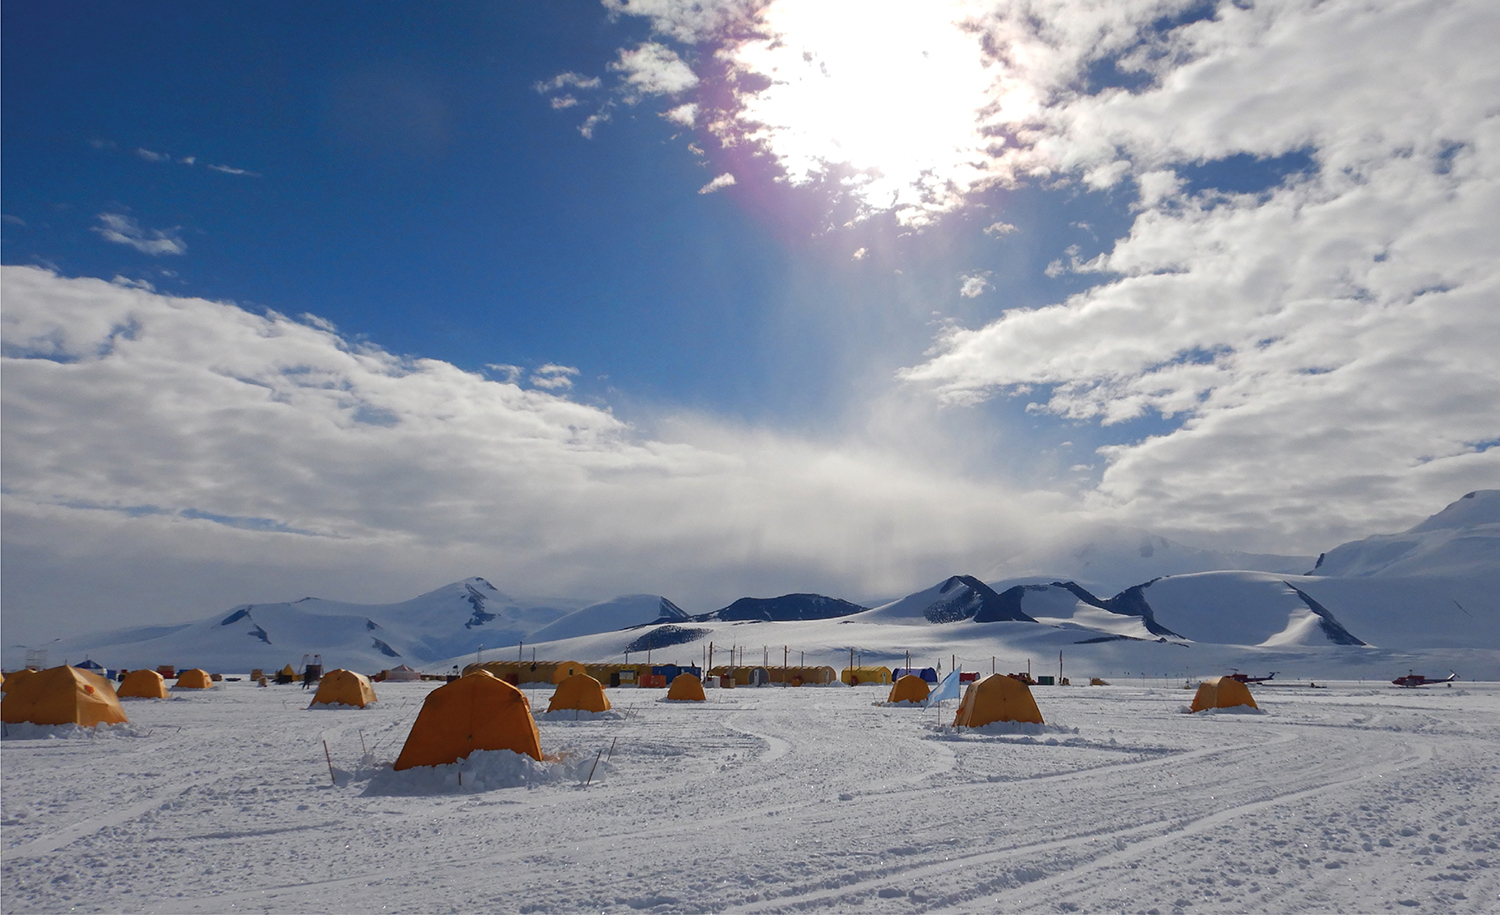 photo of tents on an icy landscape